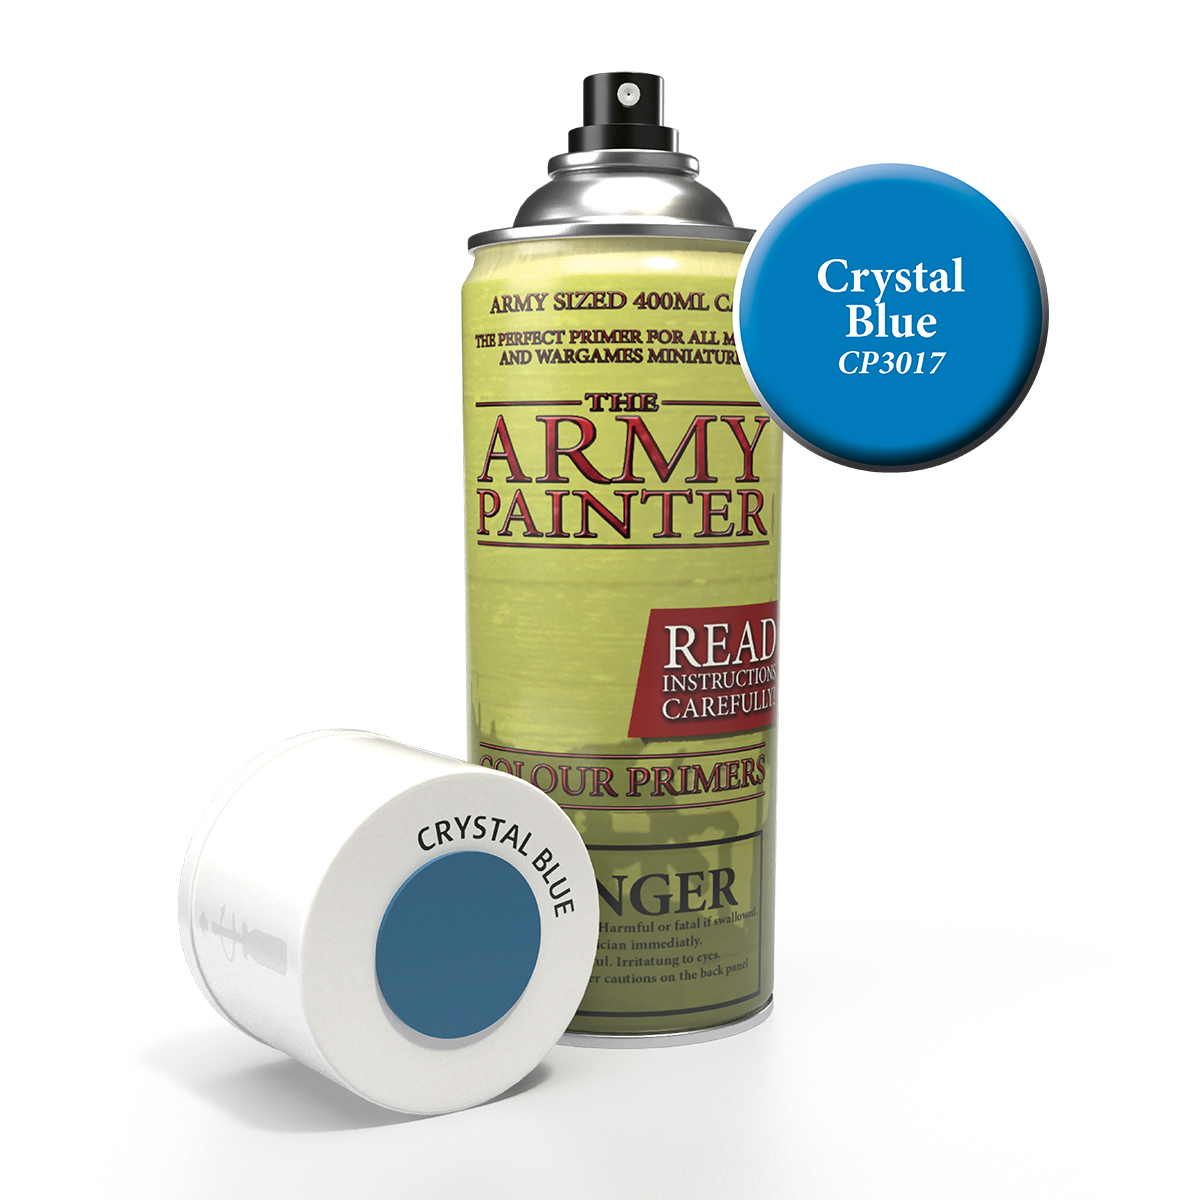 ArmyPainter Colorspray Crystal Blue